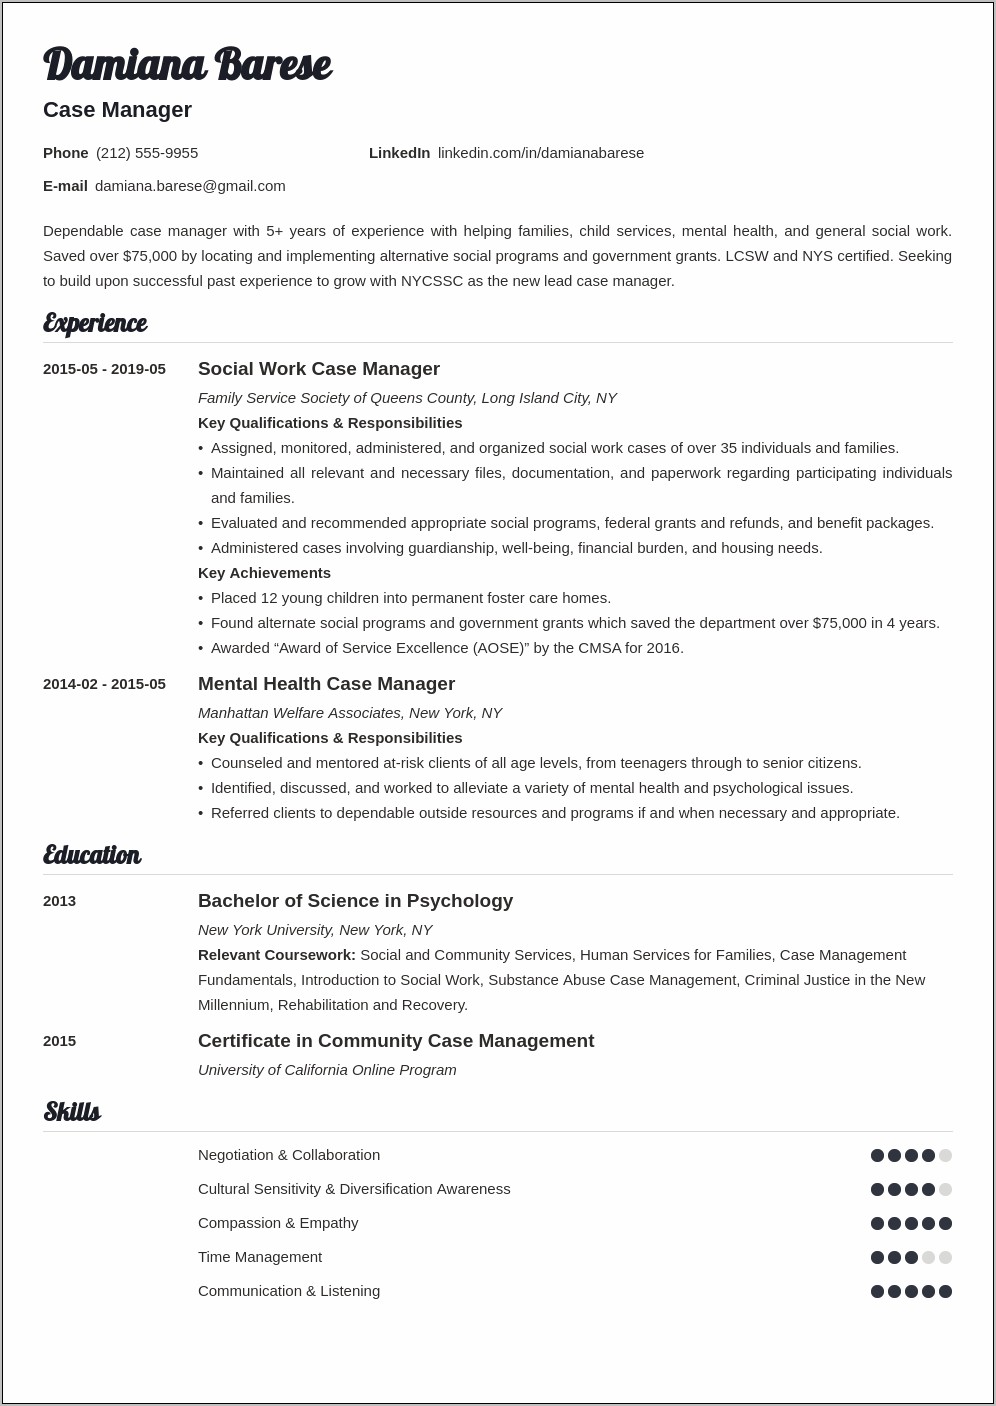 Case Manager Work Experience Resume